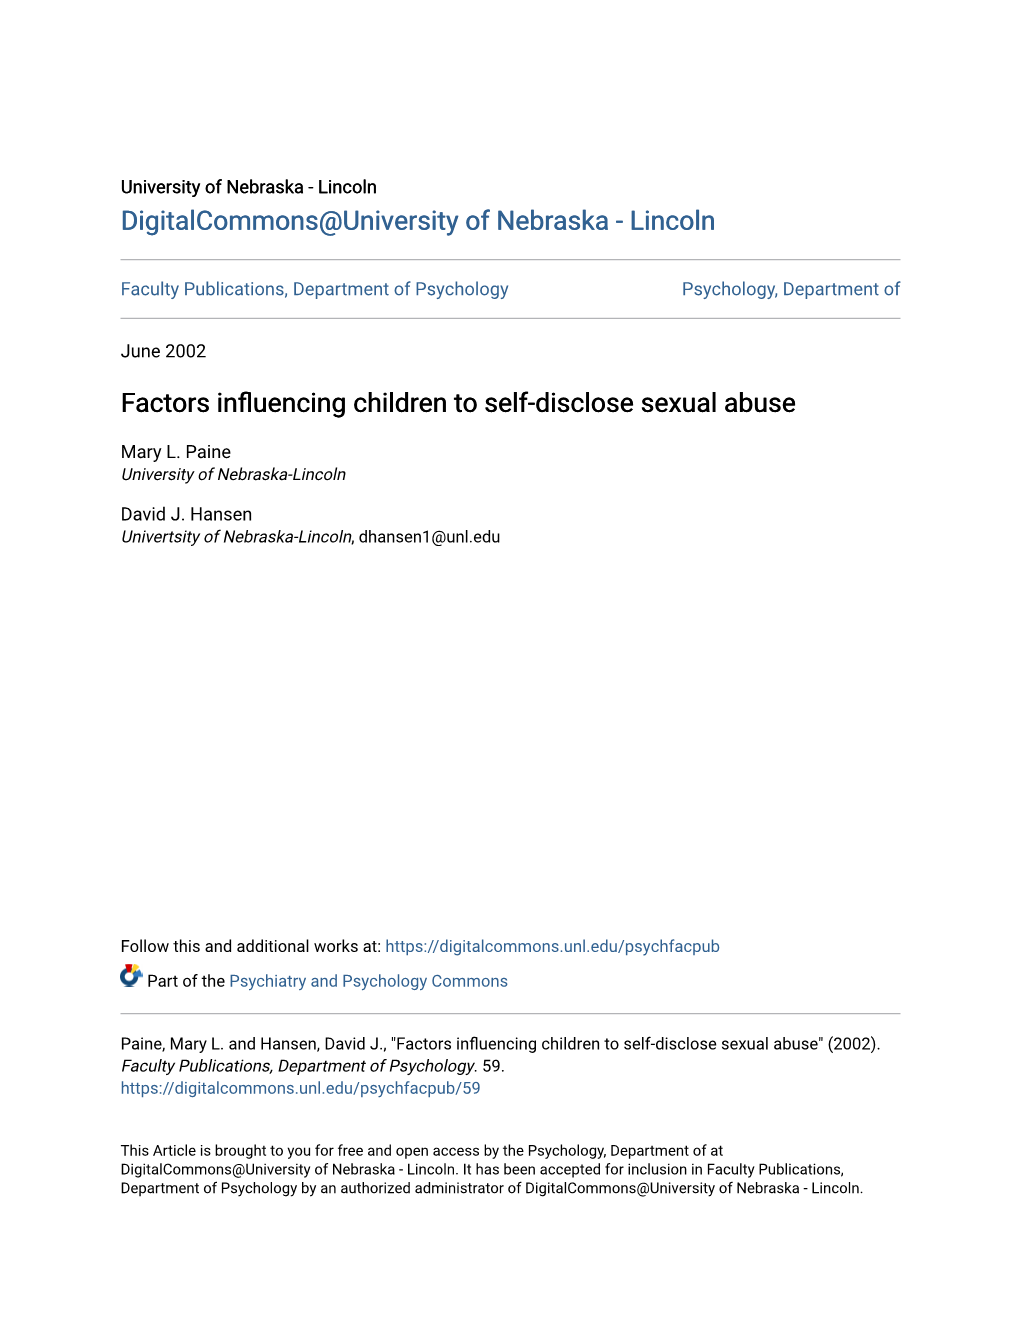 Factors Influencing Children to Self-Disclose Sexual Abuse